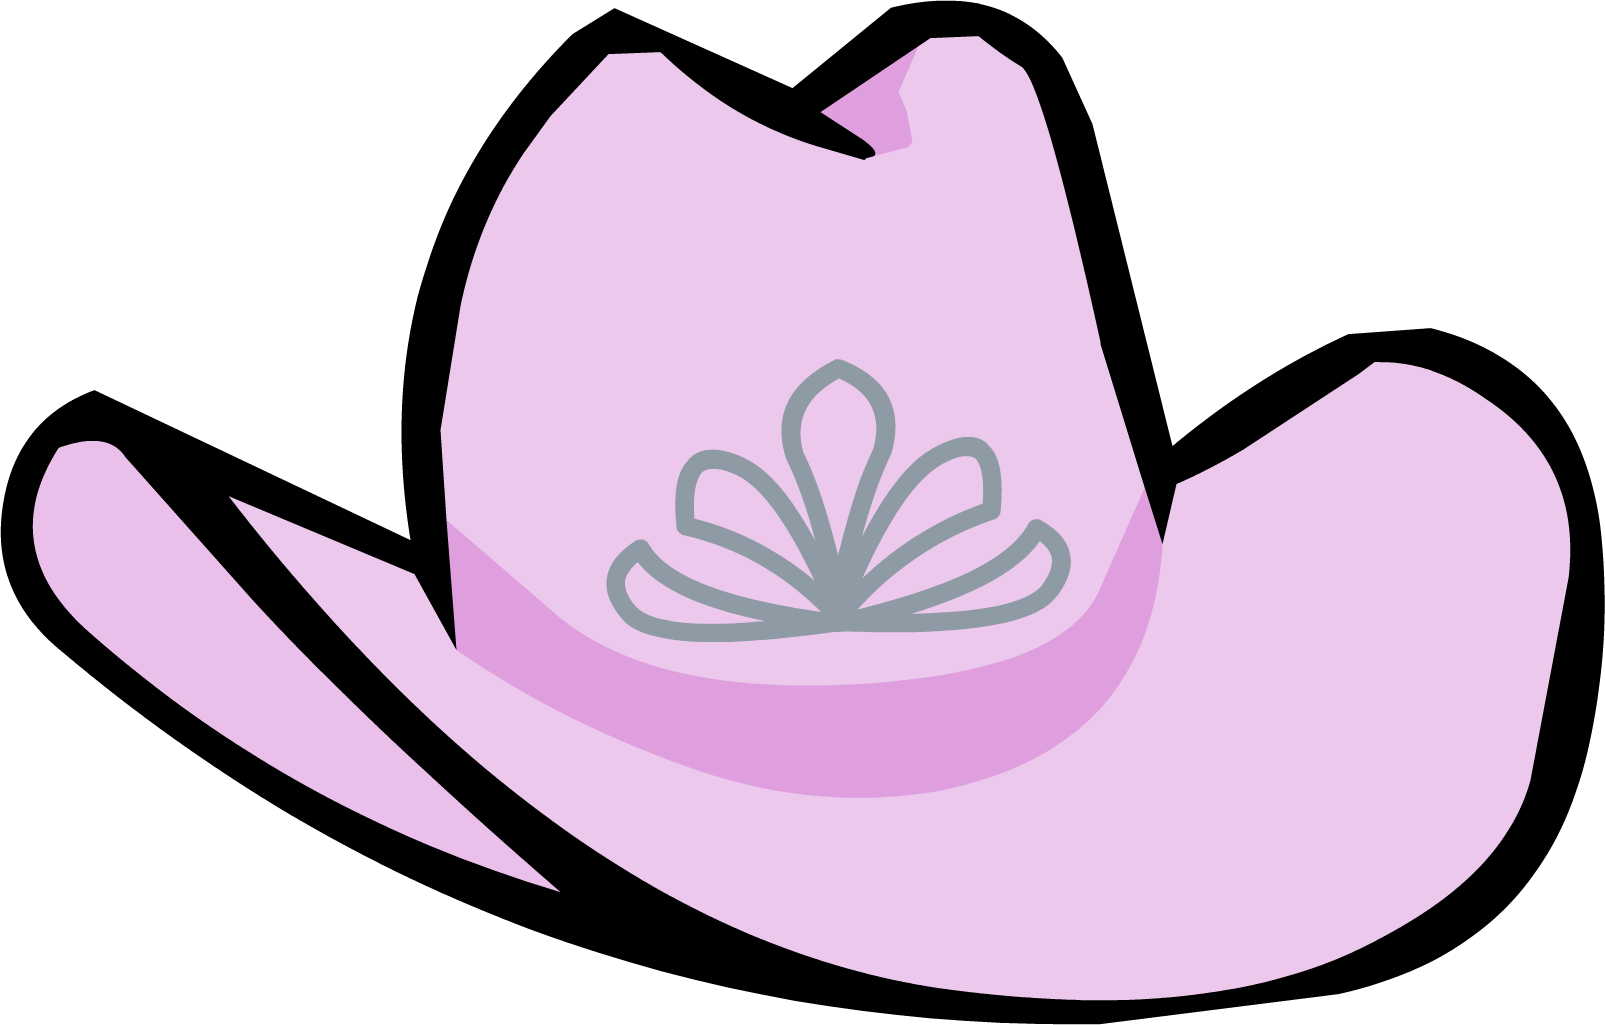 Cowgirl clipart western girl. Pink hat club penguin